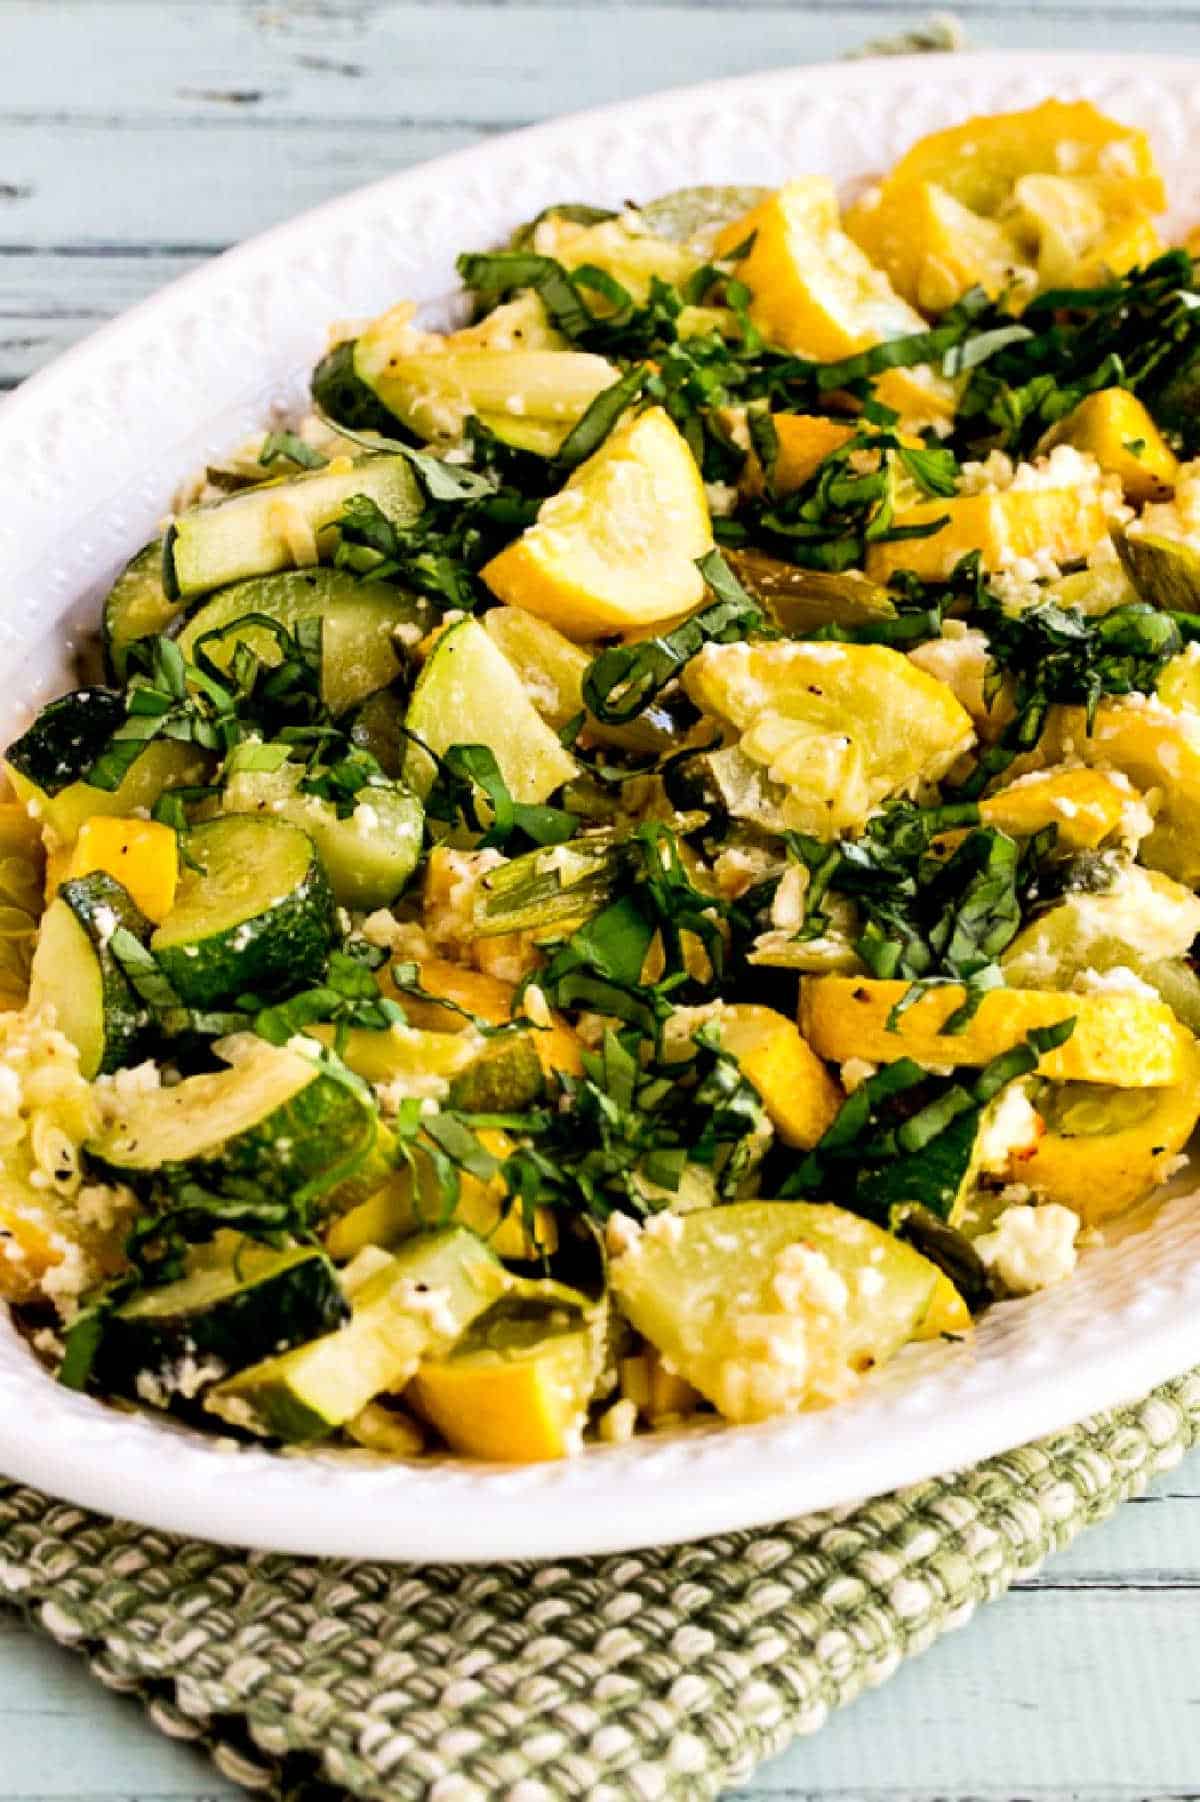 Roasted Summer Squash with Feta and Basil shown on serving platter